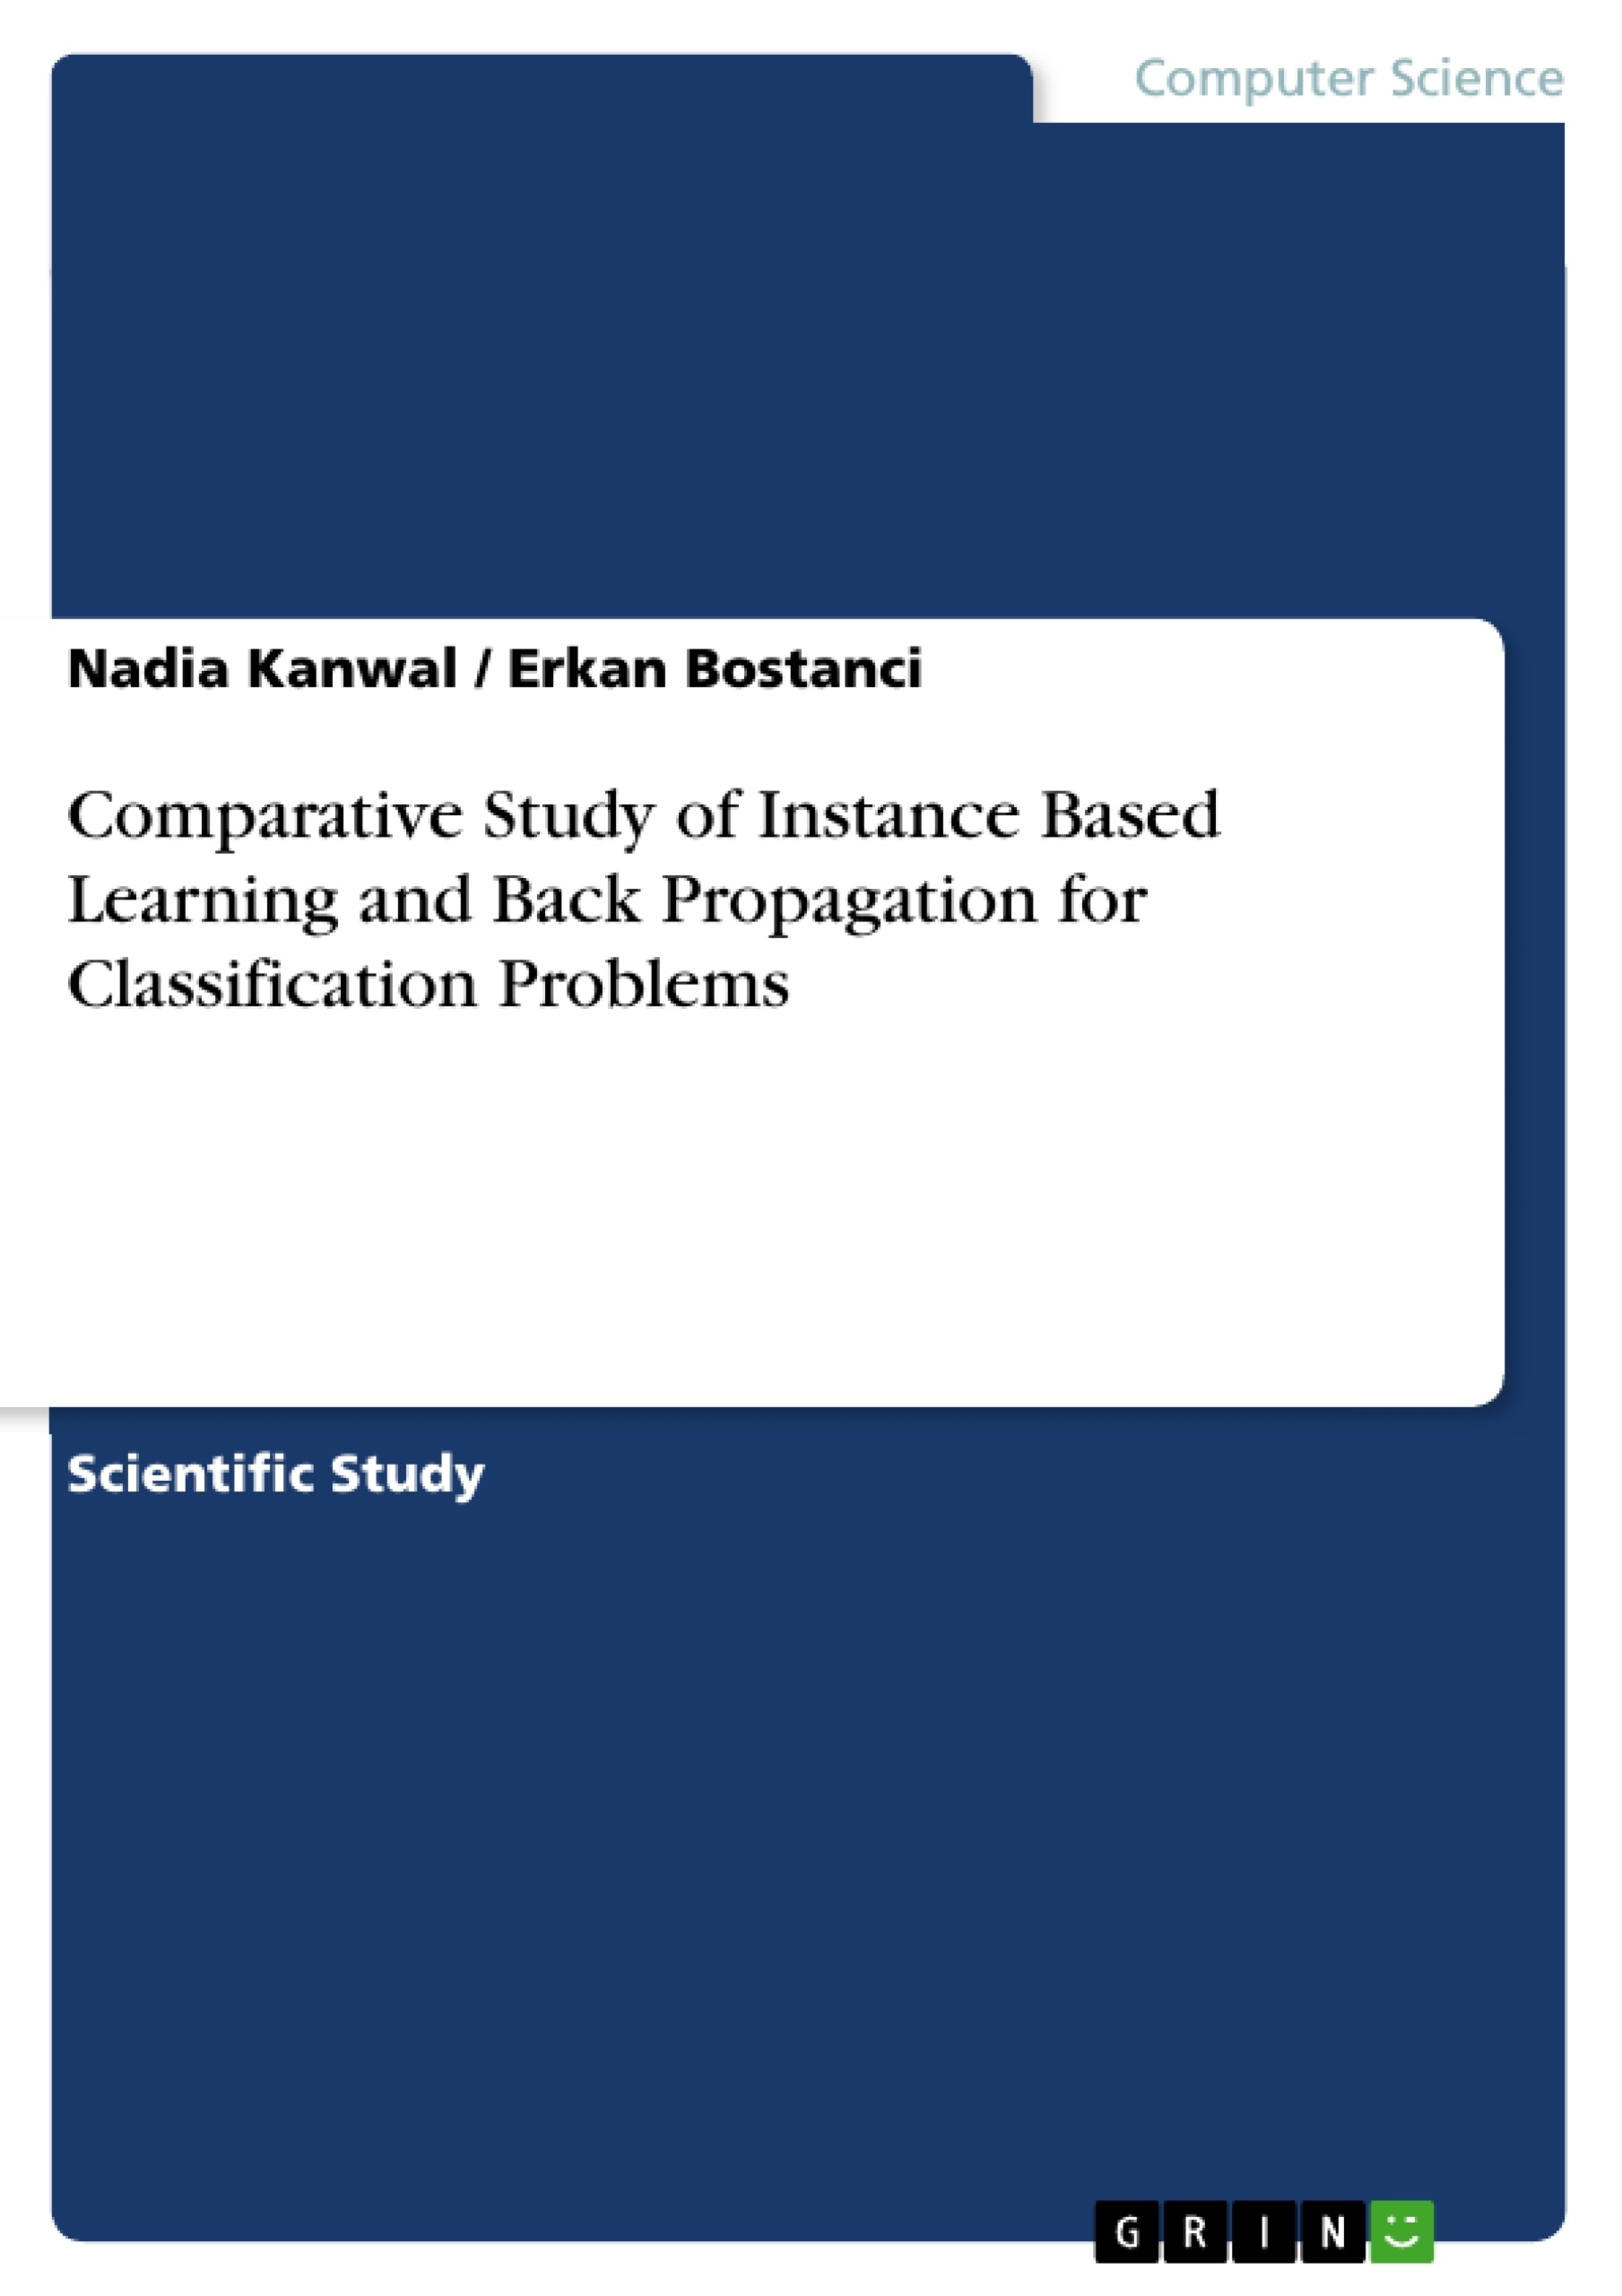 Title: Comparative Study of Instance Based Learning and Back Propagation for Classification Problems